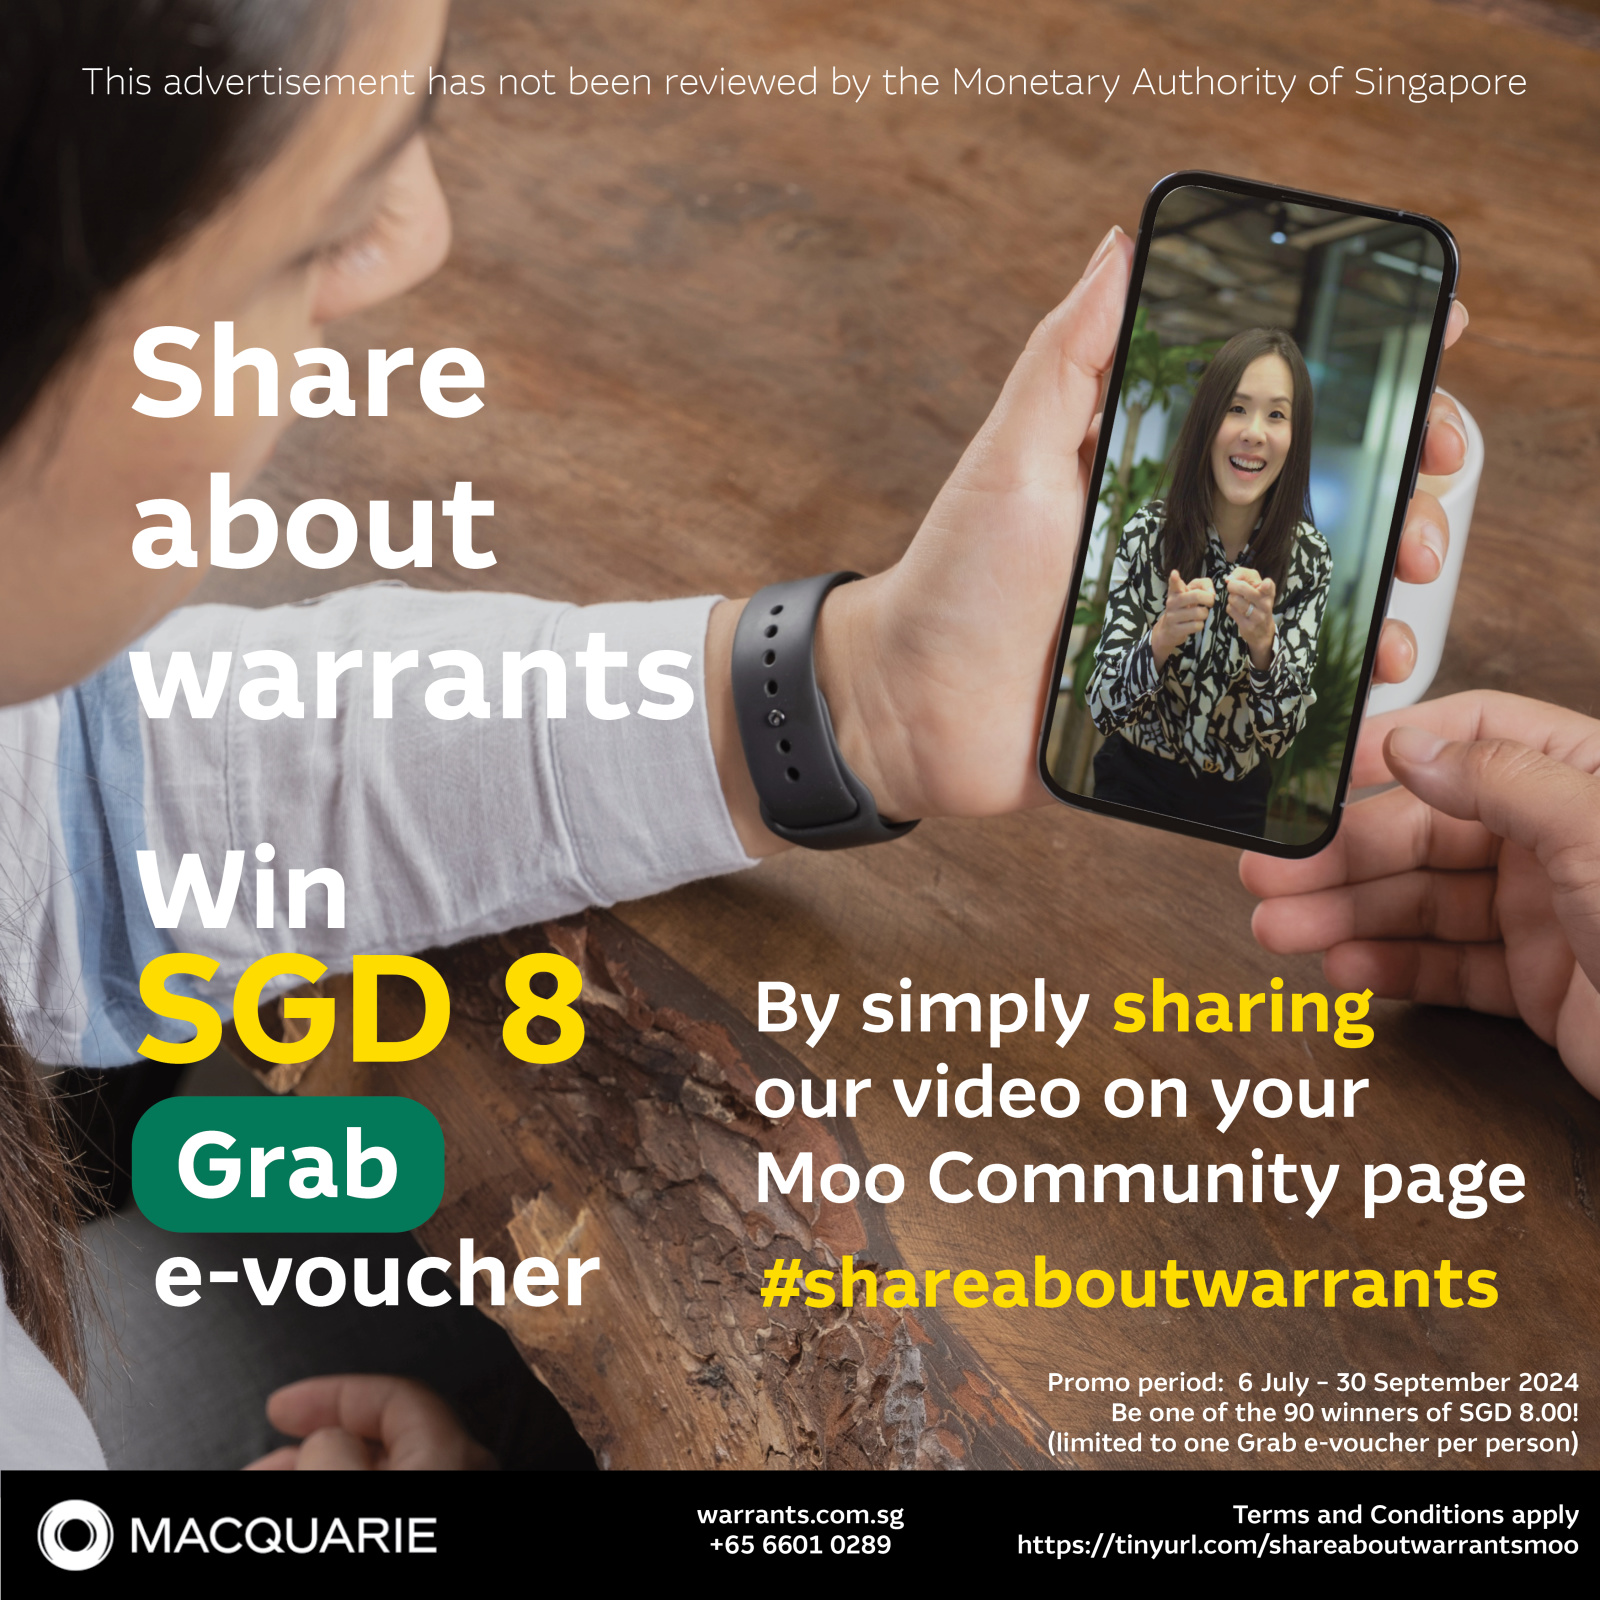 Share about warrants SGD 8 giveaway campaign!